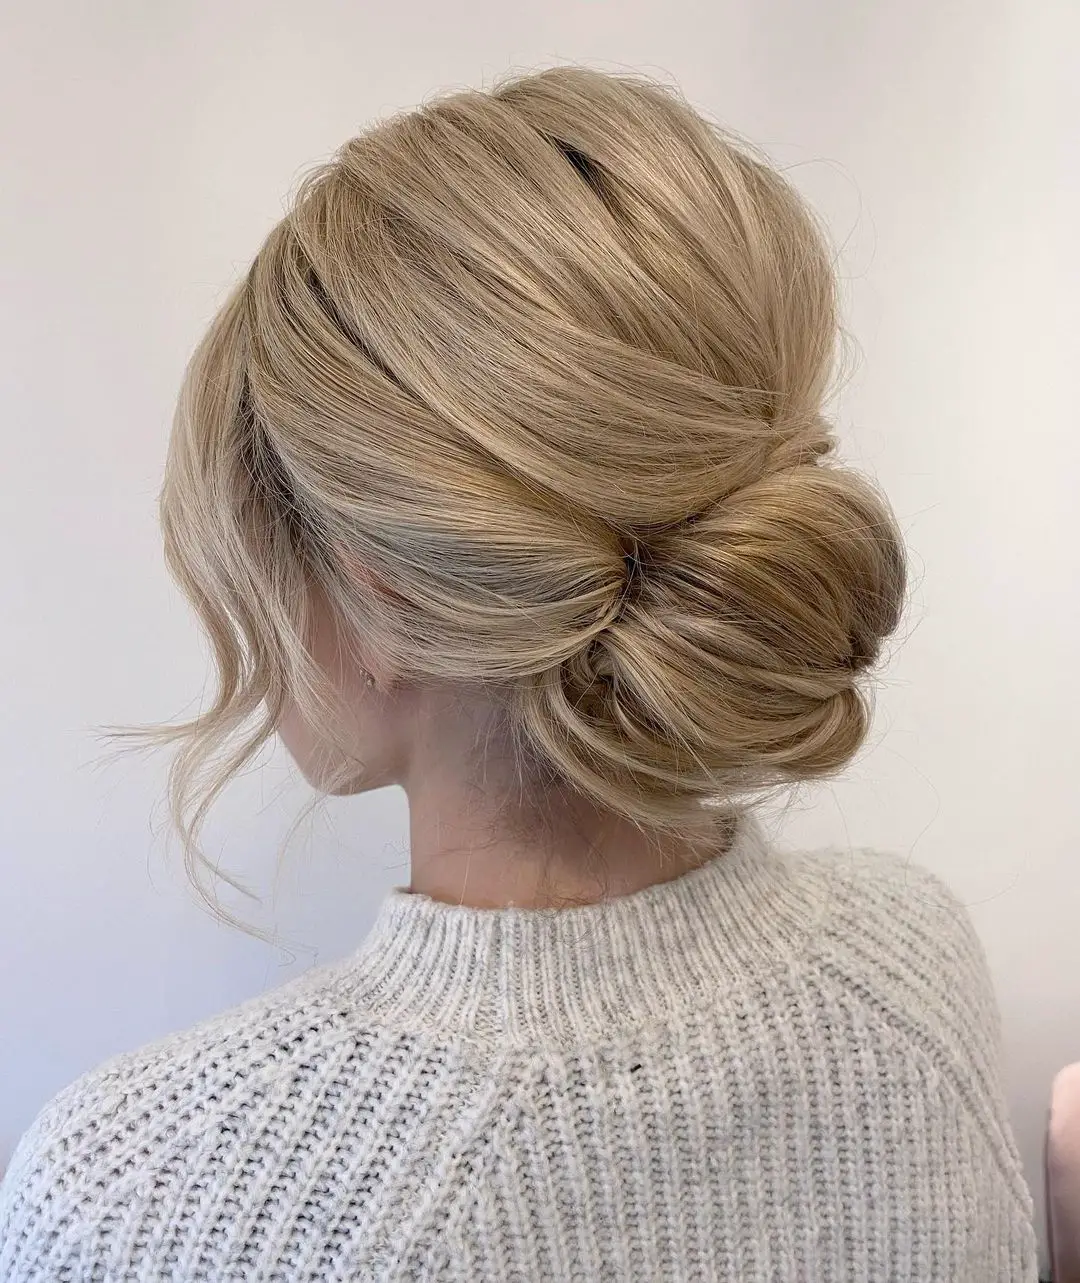 31-professional-job-interview-hairstyles-for-women Simple Low Bun